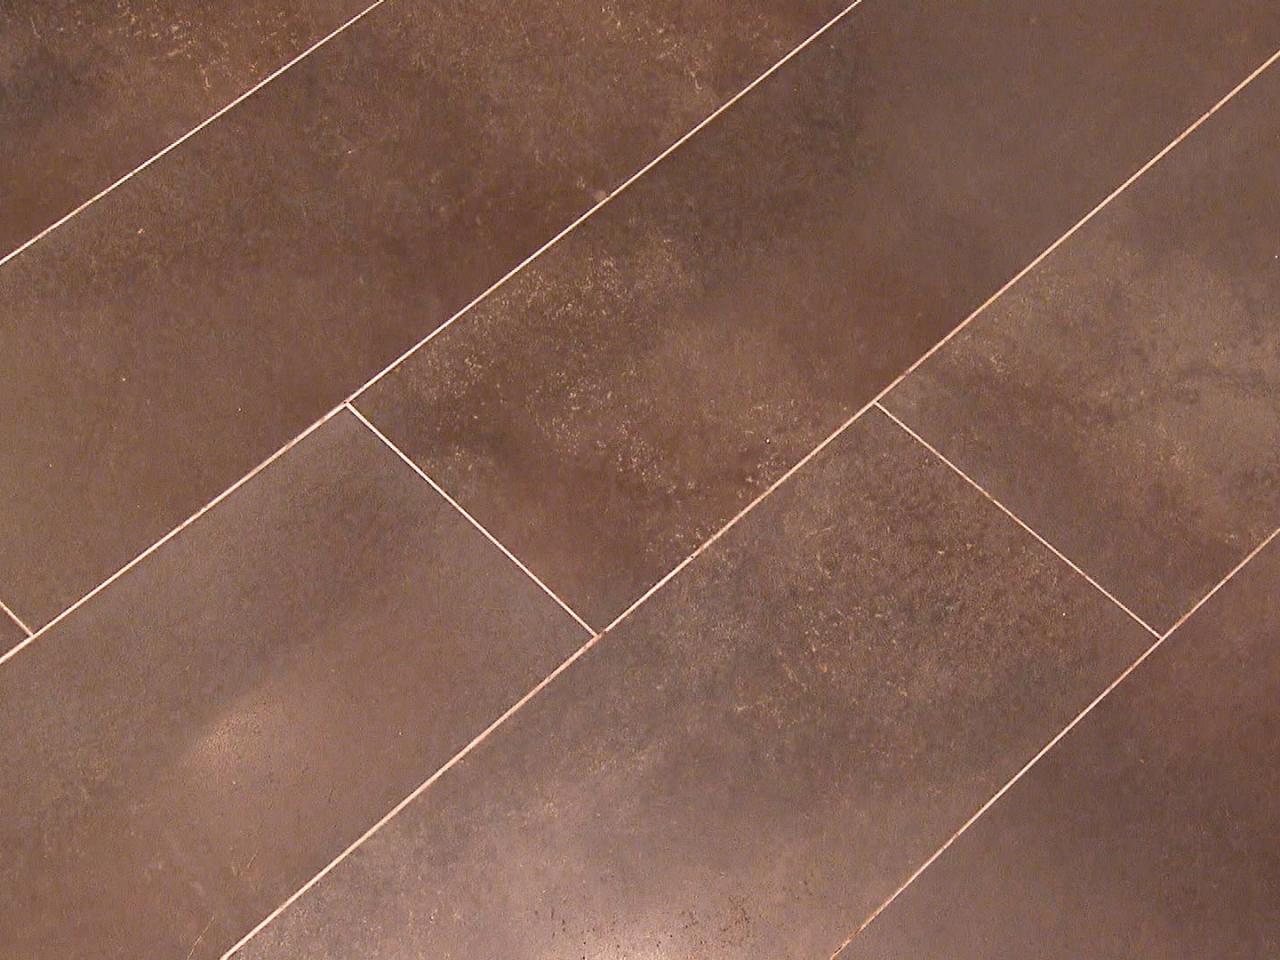 How To Install A Plank Tile Floor, What Tile Spacing Should I Use